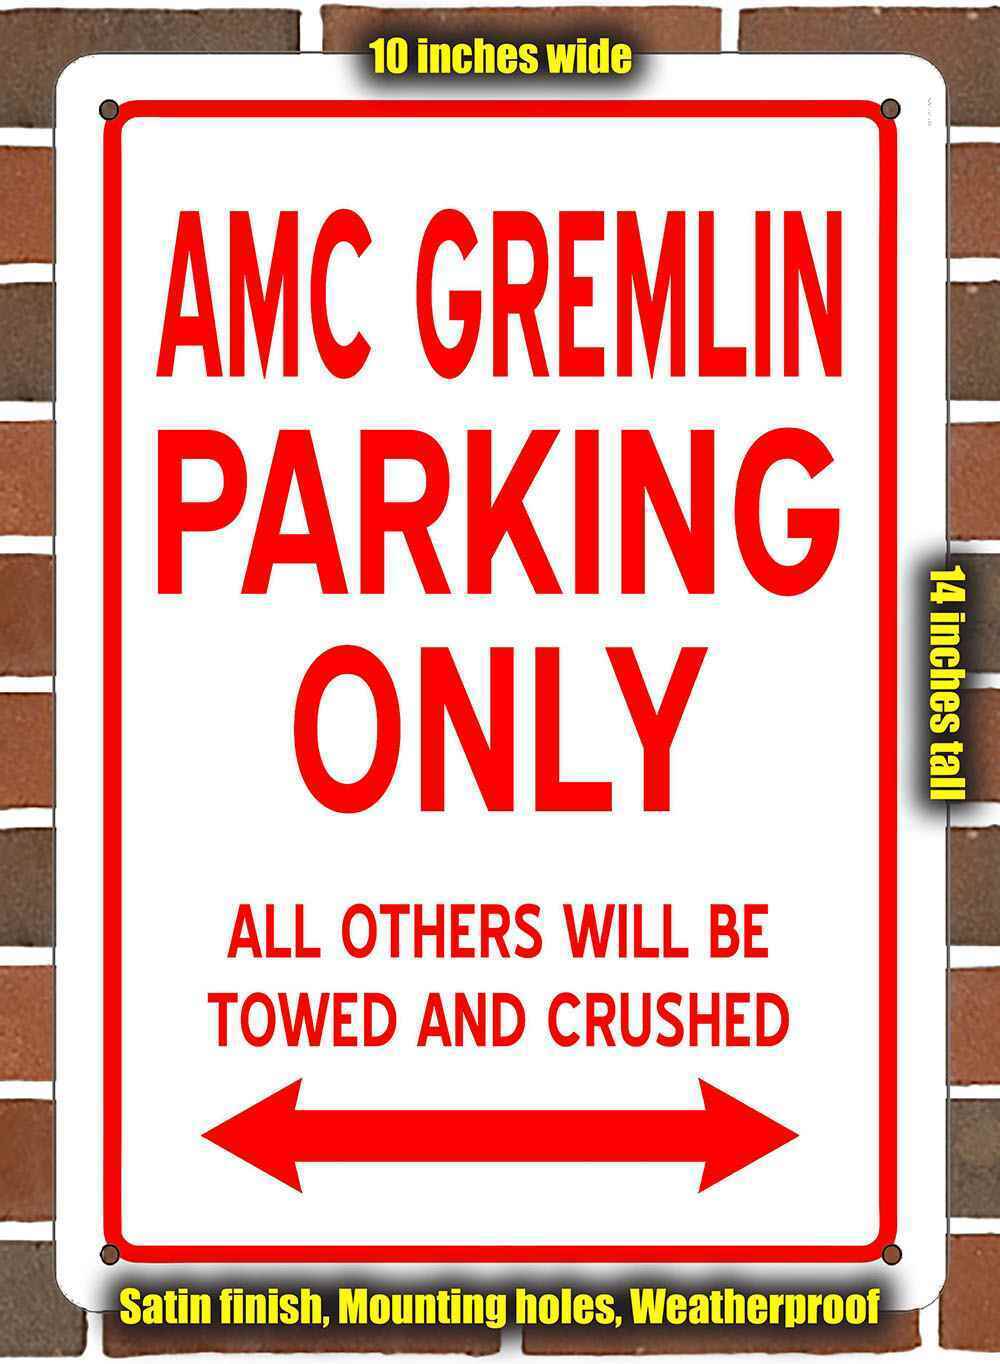 Metal Sign - AMC GREMLIN PARKING ONLY- 10x14 inches